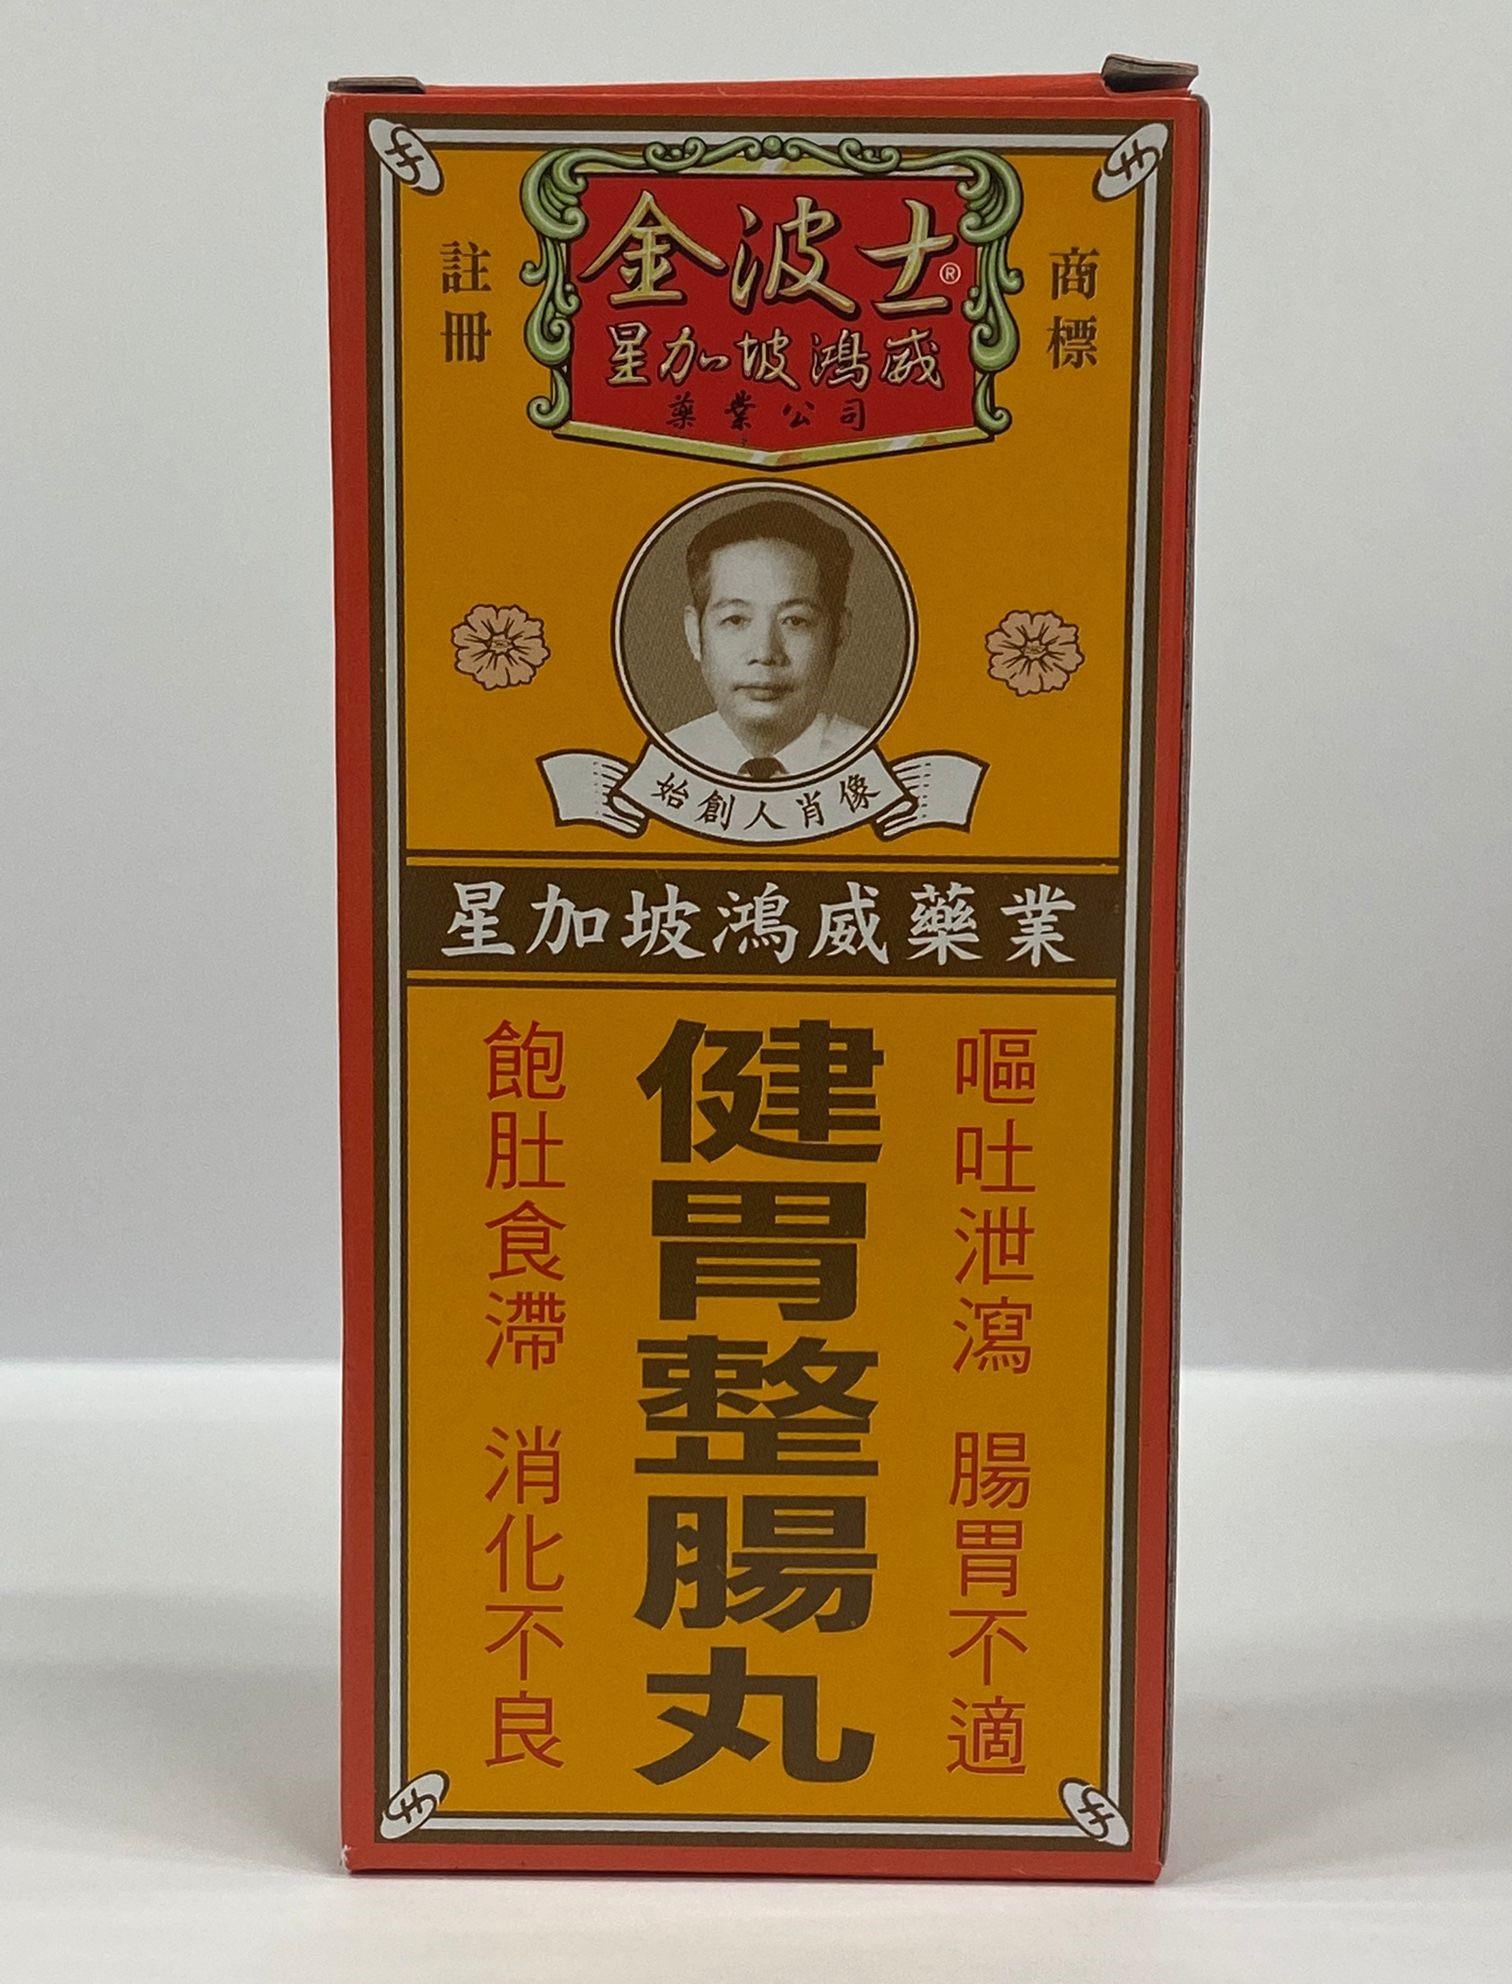 The Department of Health is today (January 2) investigating a licensed manufacturer of proprietary Chinese medicine (pCm), Singapore Headway Medicine Co (Singapore Headway), at Wo Tong Tsui Street, Kwai Chung, New Territories, for its suspected illegal sale and possession of an unregistered pCm called "Singapore Headway Goldboss Jiann Wey Jeng Charng Pill" (batch numbers: 232491, 232492, 232493, 232494, 232495). It was found that the arsenic level in some samples had exceeded the limit imposed by Chinese Medicine Council of Hong Kong. Photo shows the unregistered pCm.